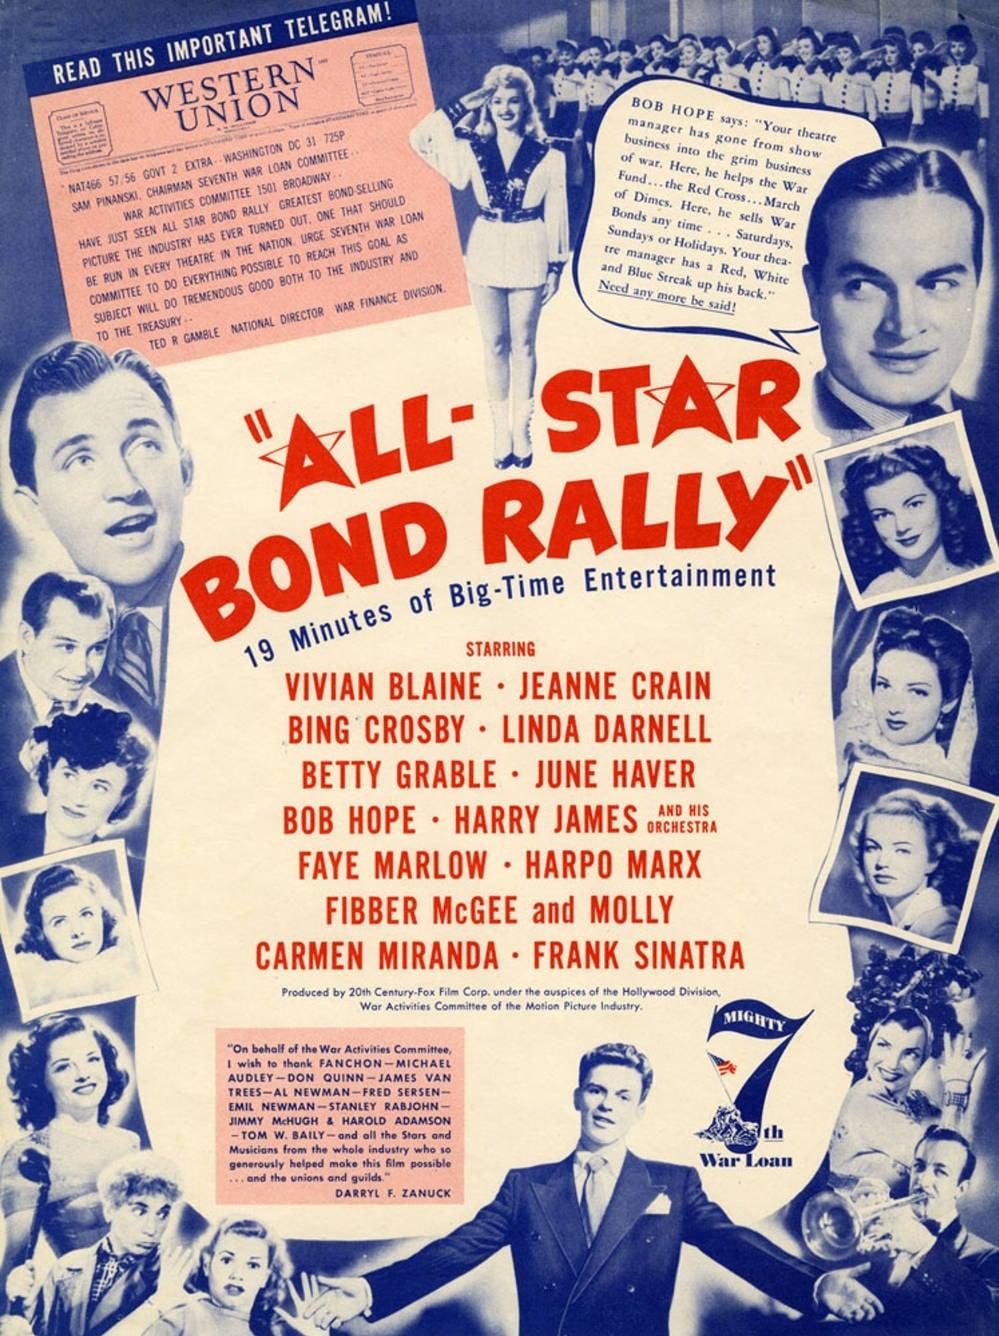 The All-Star Bond Rally poster